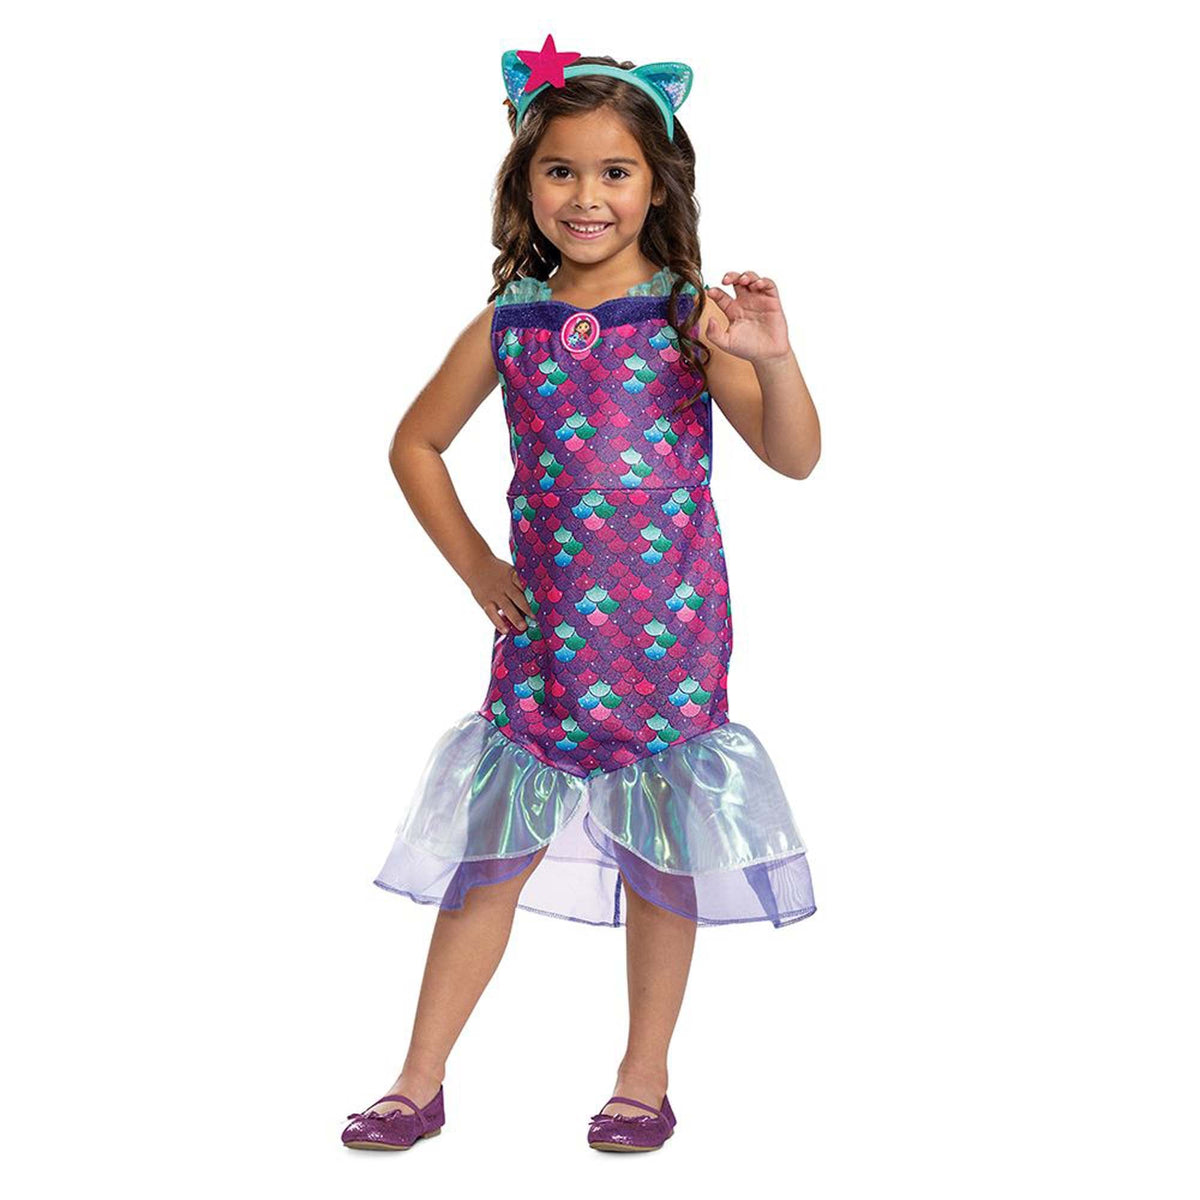 DISGUISE (TOY-SPORT) Costumes Gabby's Dollhouse Mercat Dress Costume for Toddlers, Mermaid Scales Dress